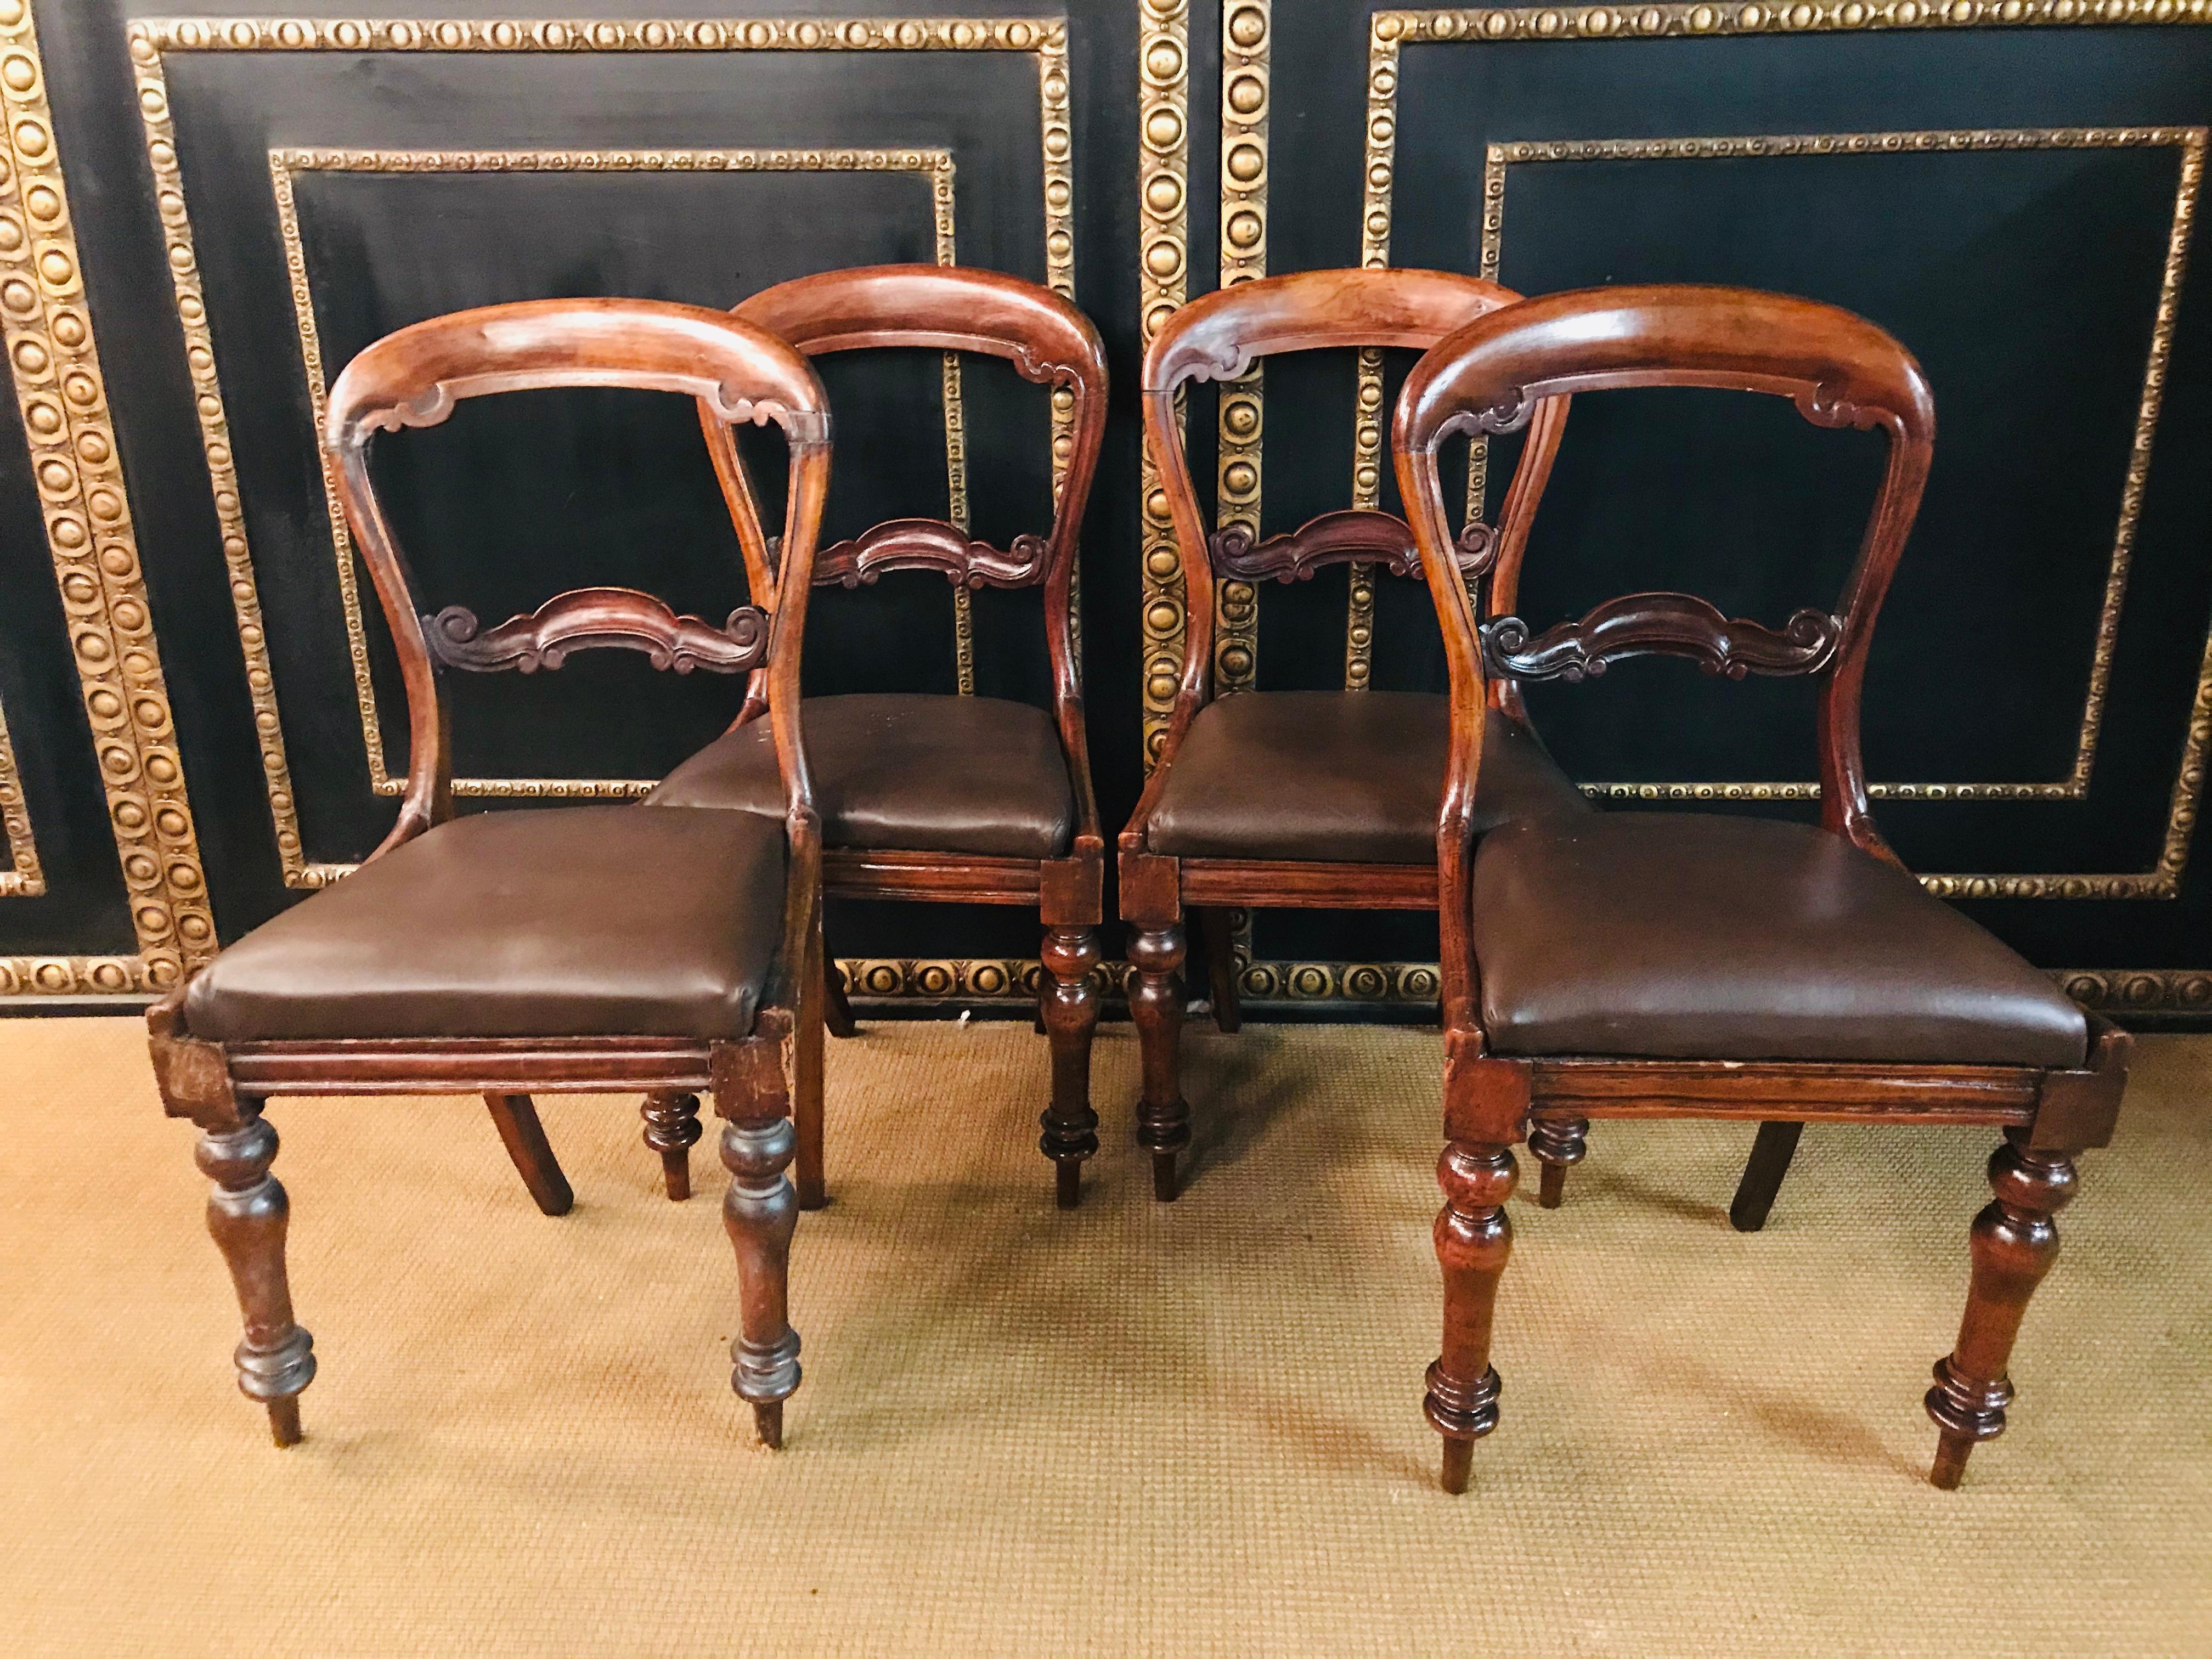 4 original Biedermeier chairs solid mahogany with leather seats.
the front legs are turned.